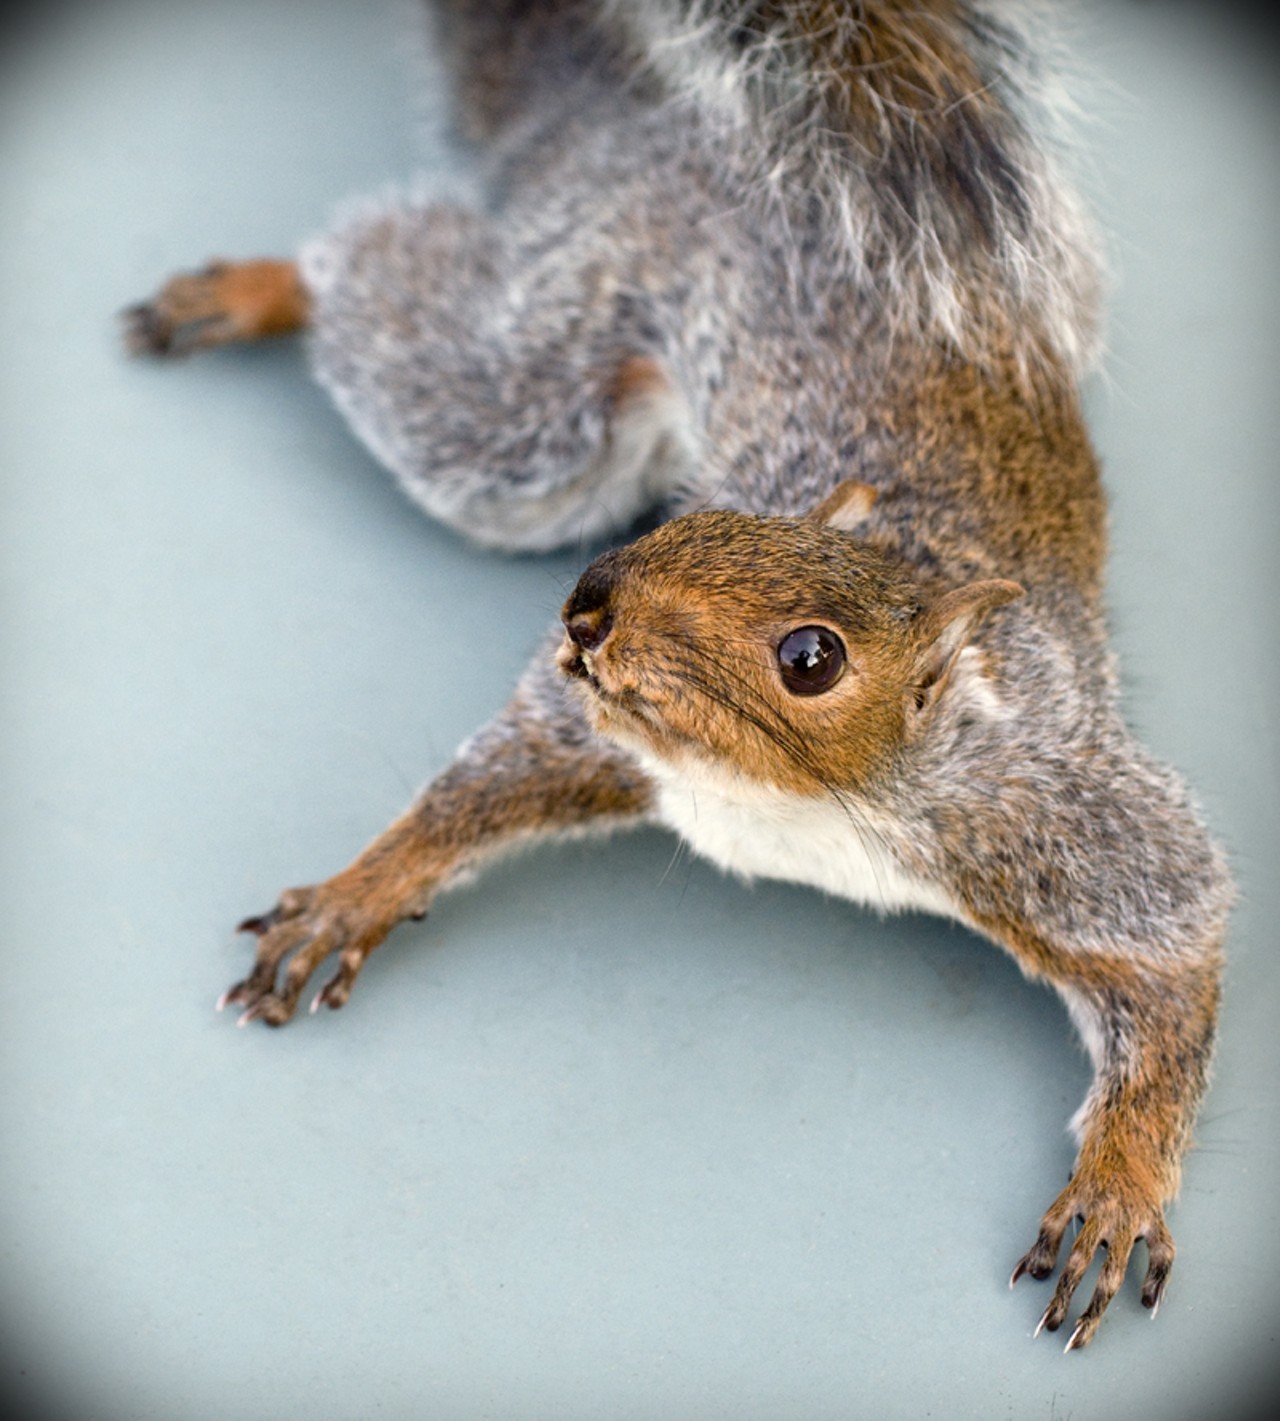 This squirrel can hang so it looks like it's crawling down your wall... nice.